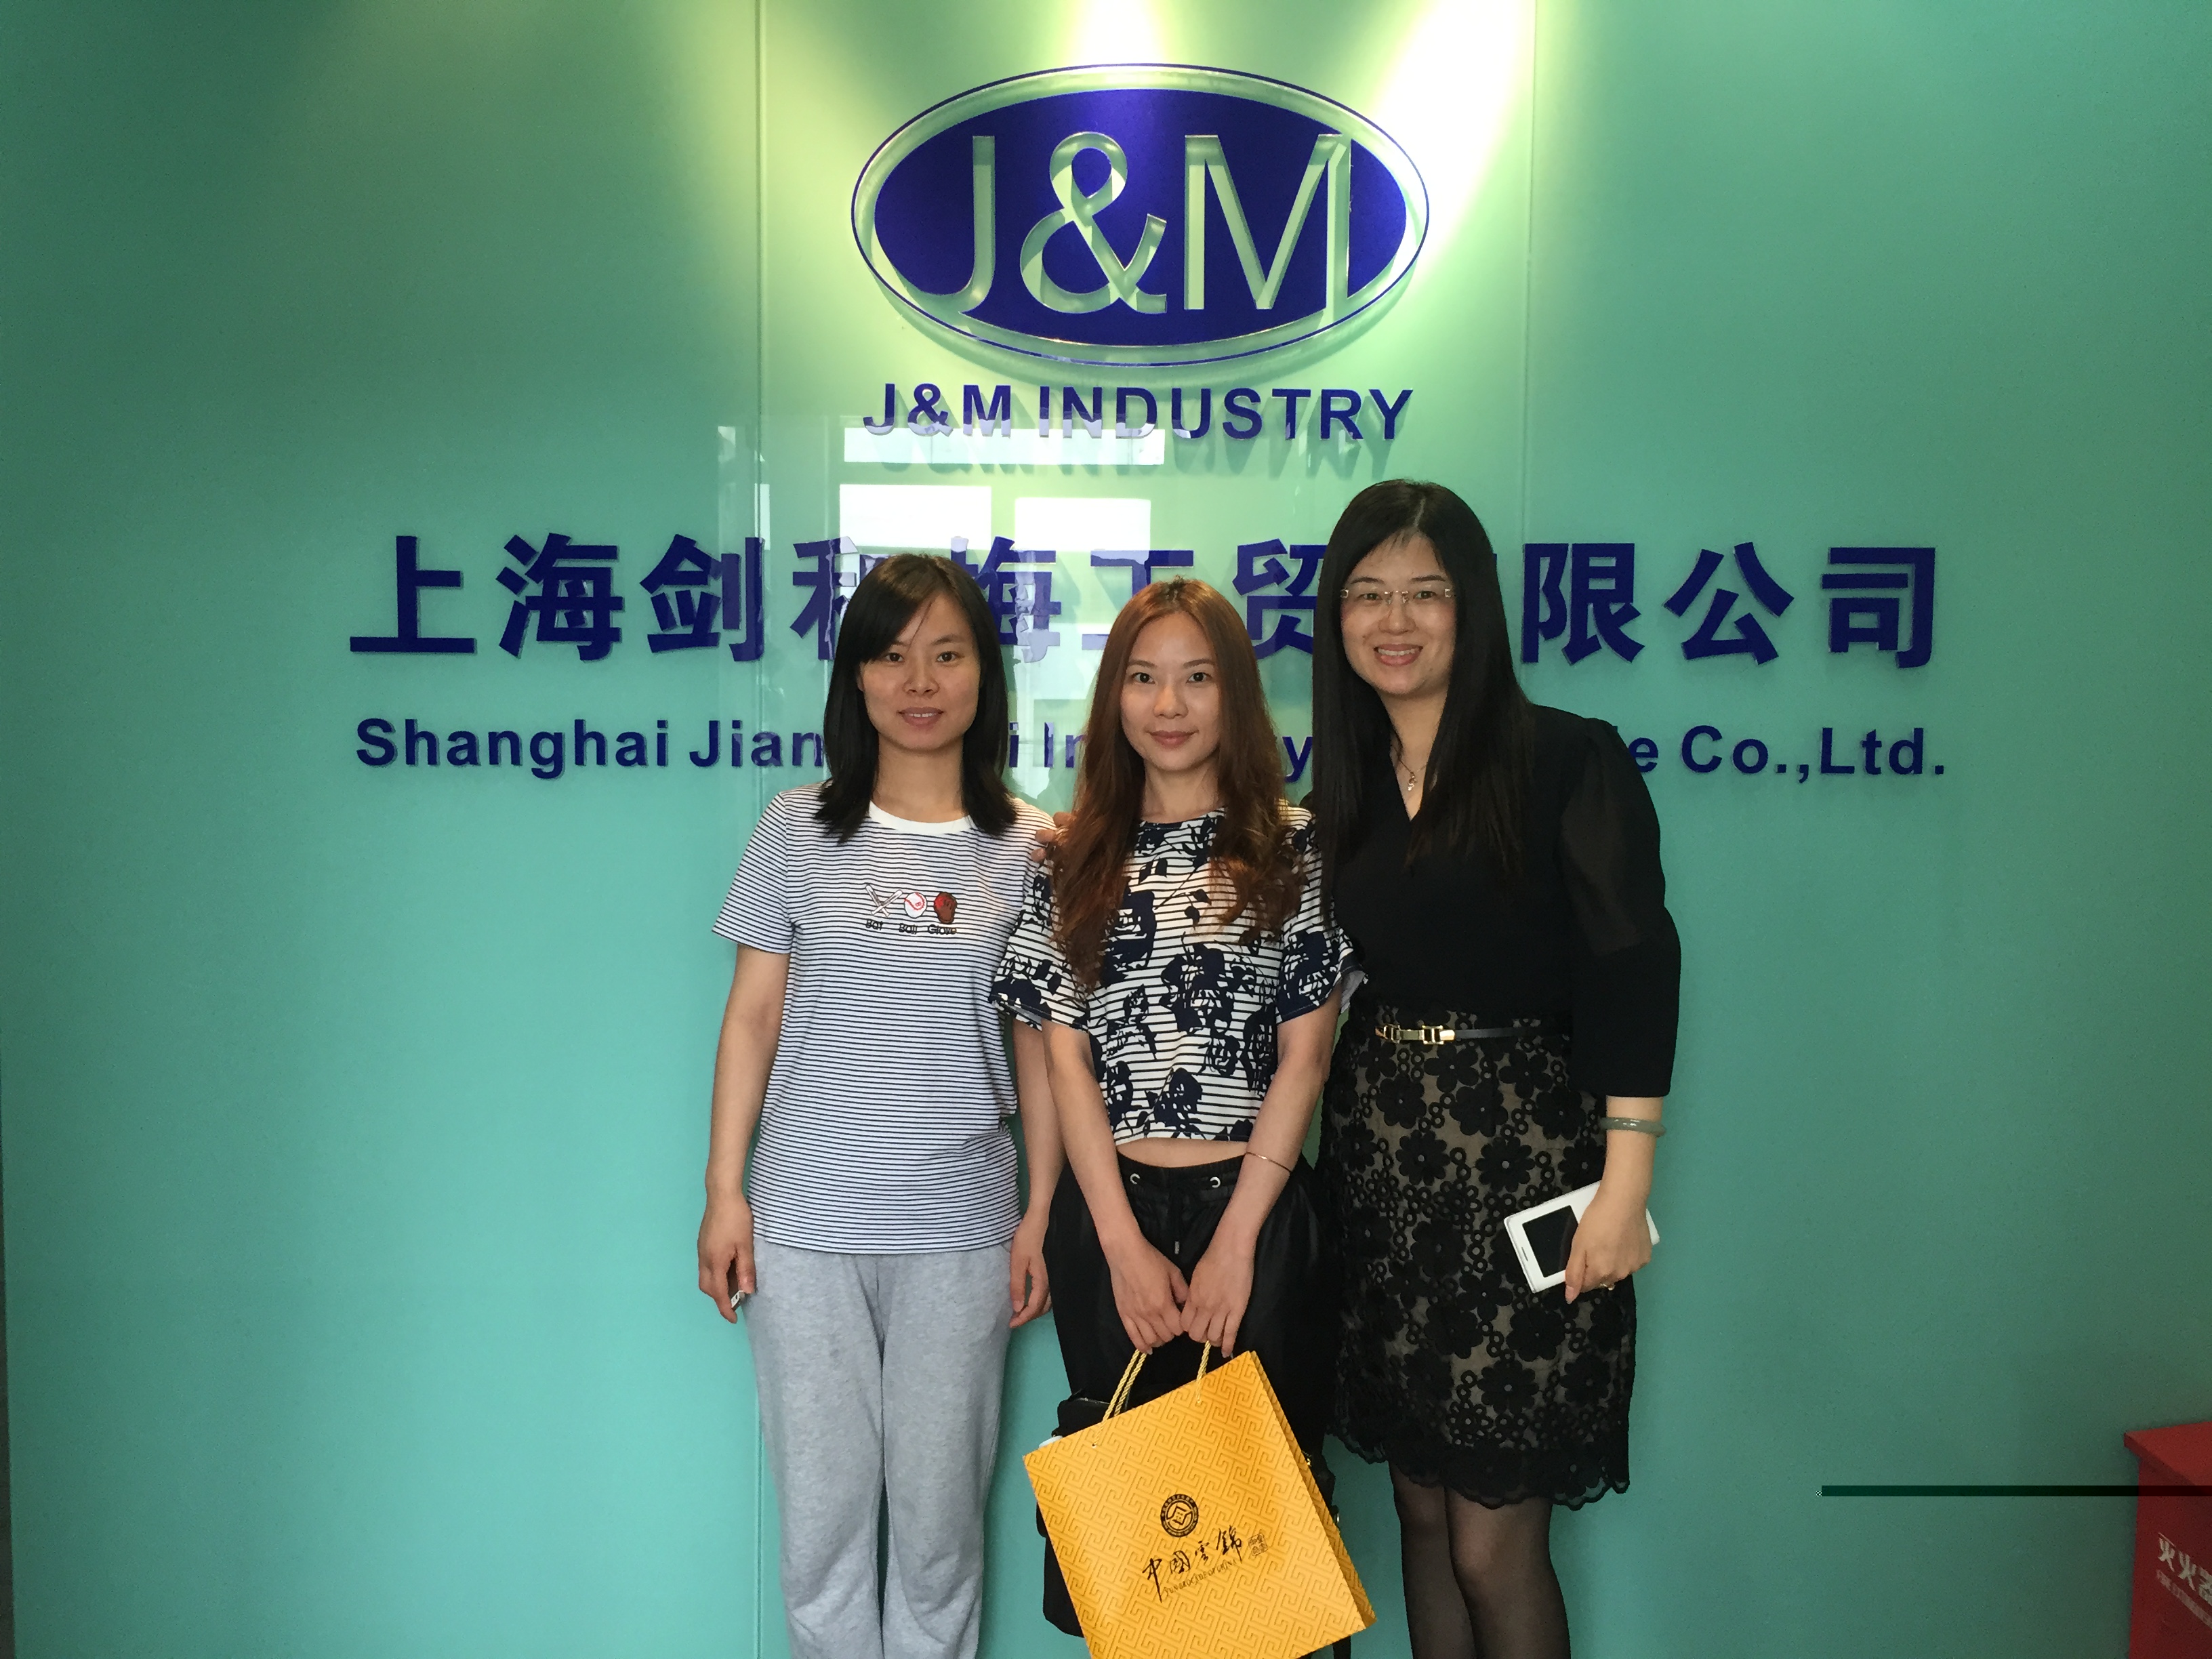 June 7th 2016, Taiwan clients came to our factory for product inspections